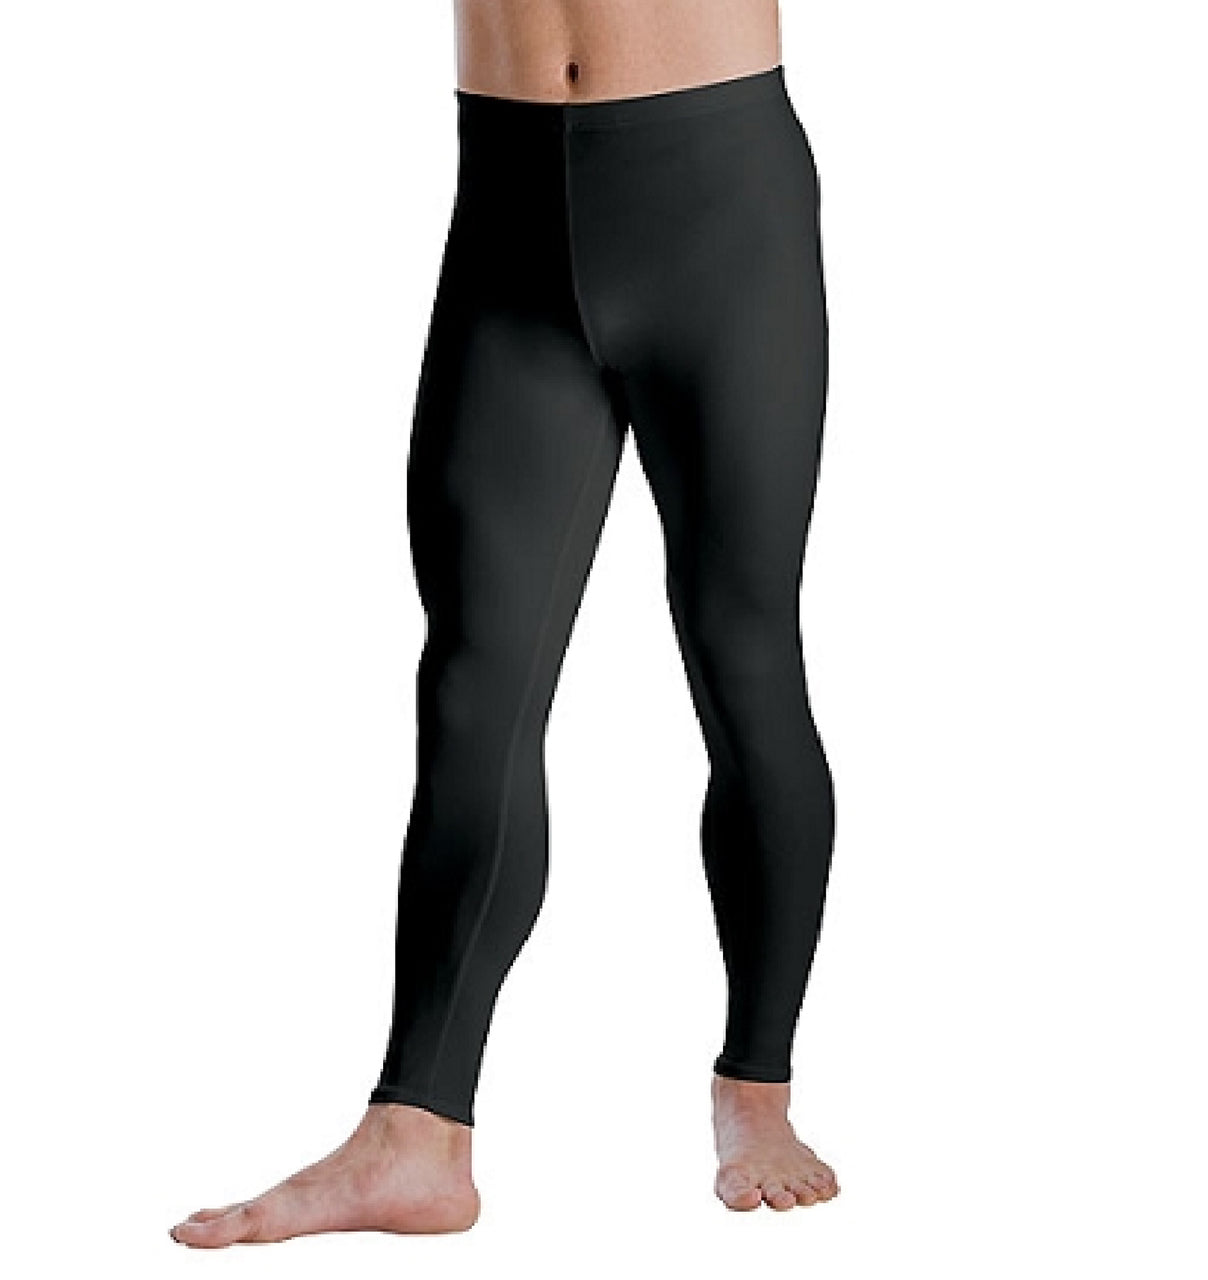 Male Athletic Tights - B&M Online Store